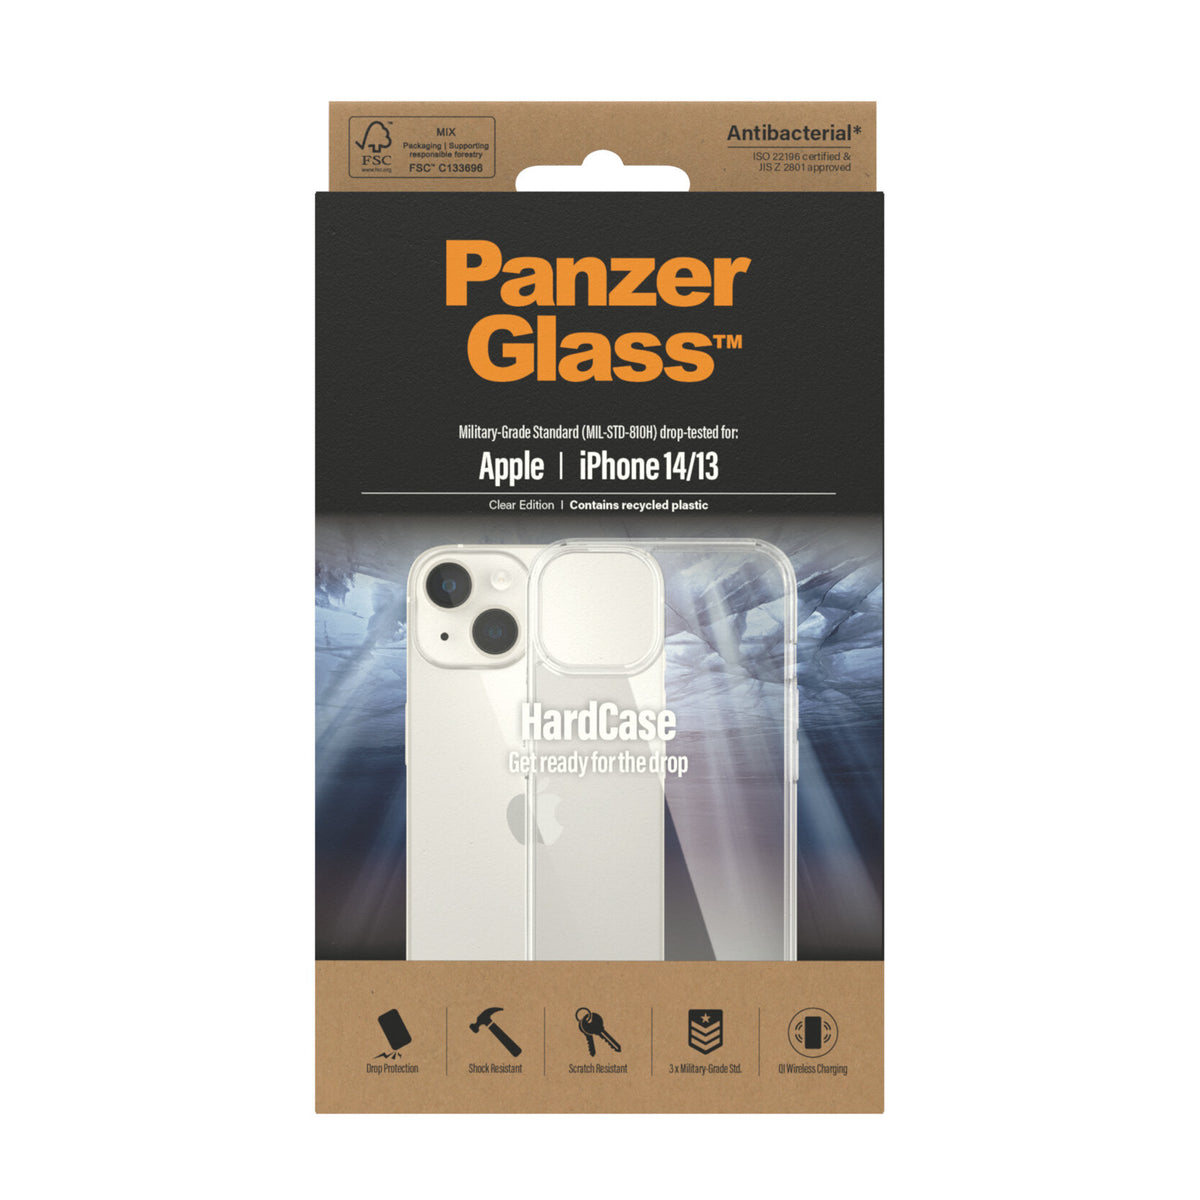 PanzerGlass ® HardCase for iPhone 14 / 13 in Clear